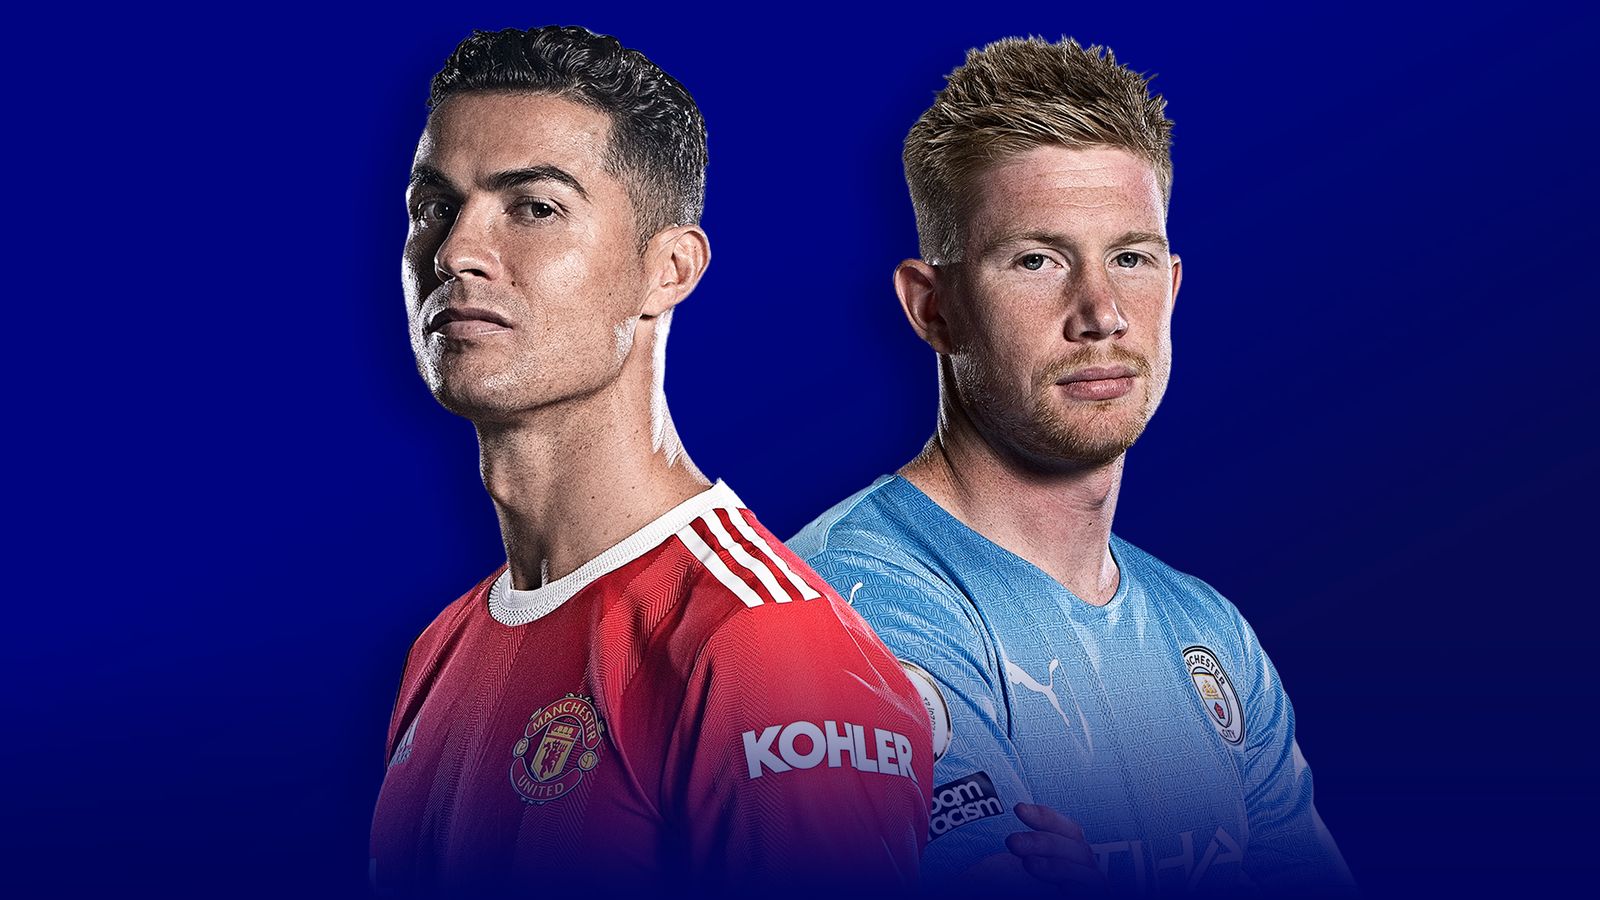 Manchester United vs Man City Manchester derby kickoff time, how to